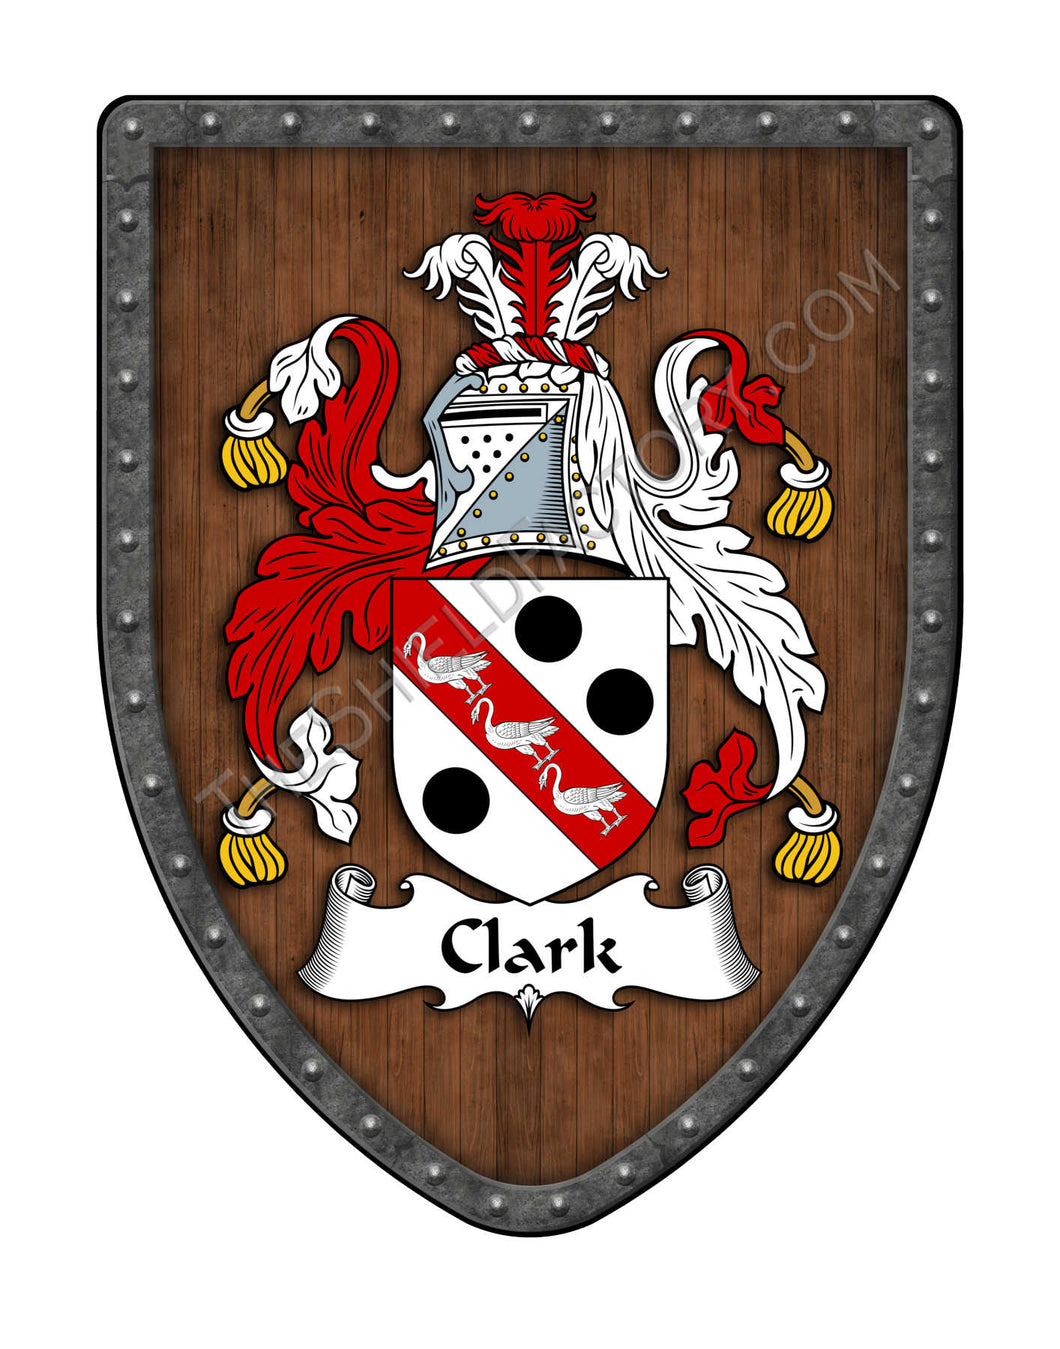 Clark Coat of Arms Shield Family Crest